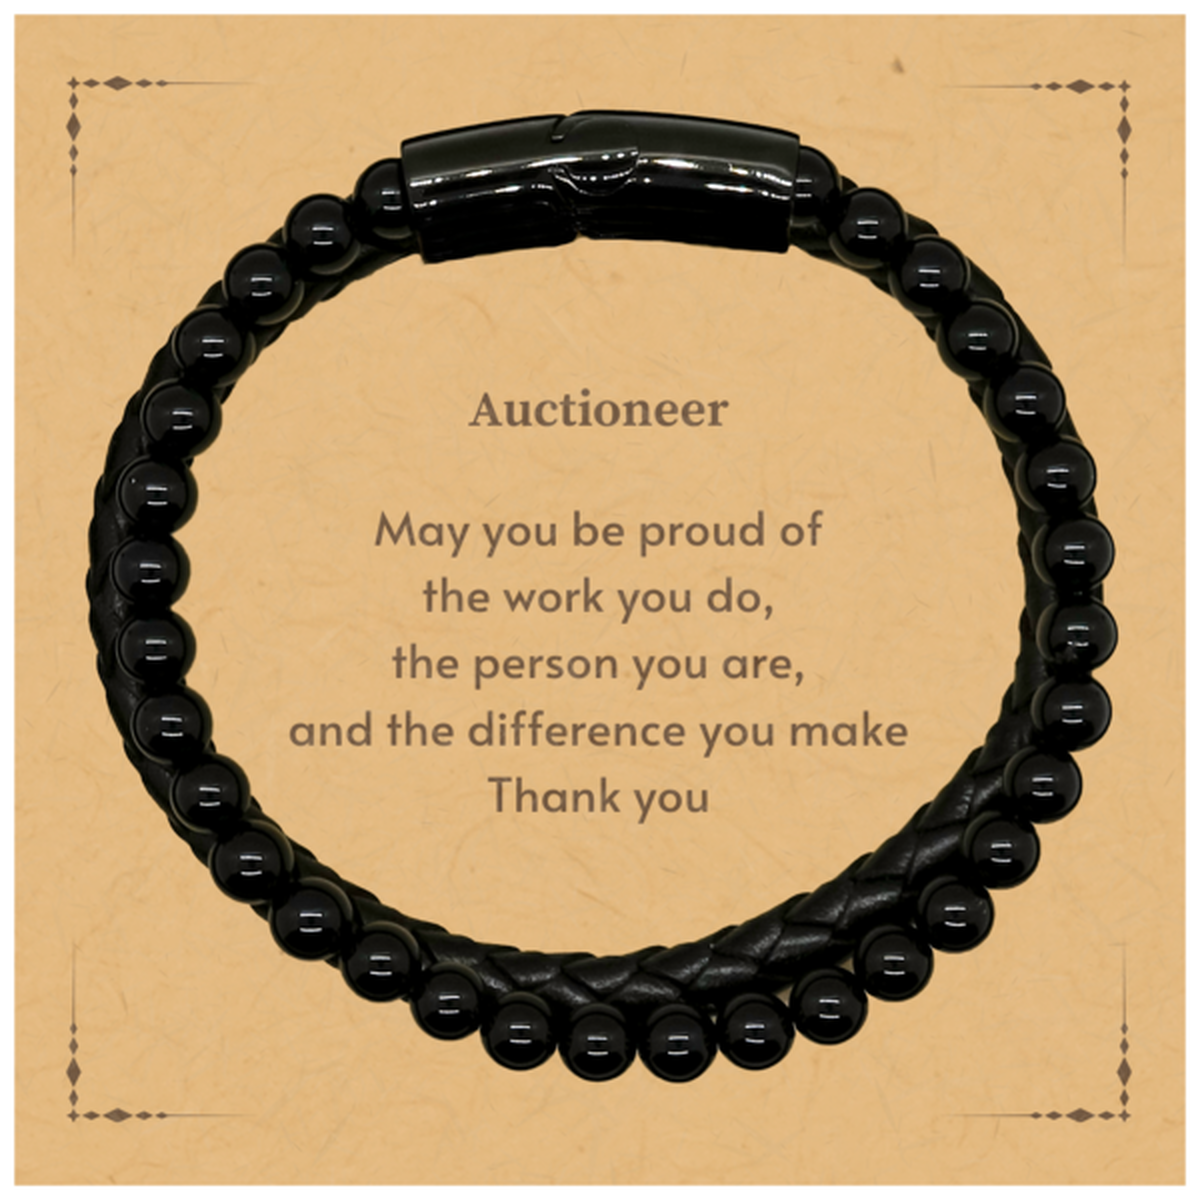 Heartwarming Stone Leather Bracelets Retirement Coworkers Gifts for Auctioneer, Auctioneer May You be proud of the work you do, the person you are Gifts for Boss Men Women Friends